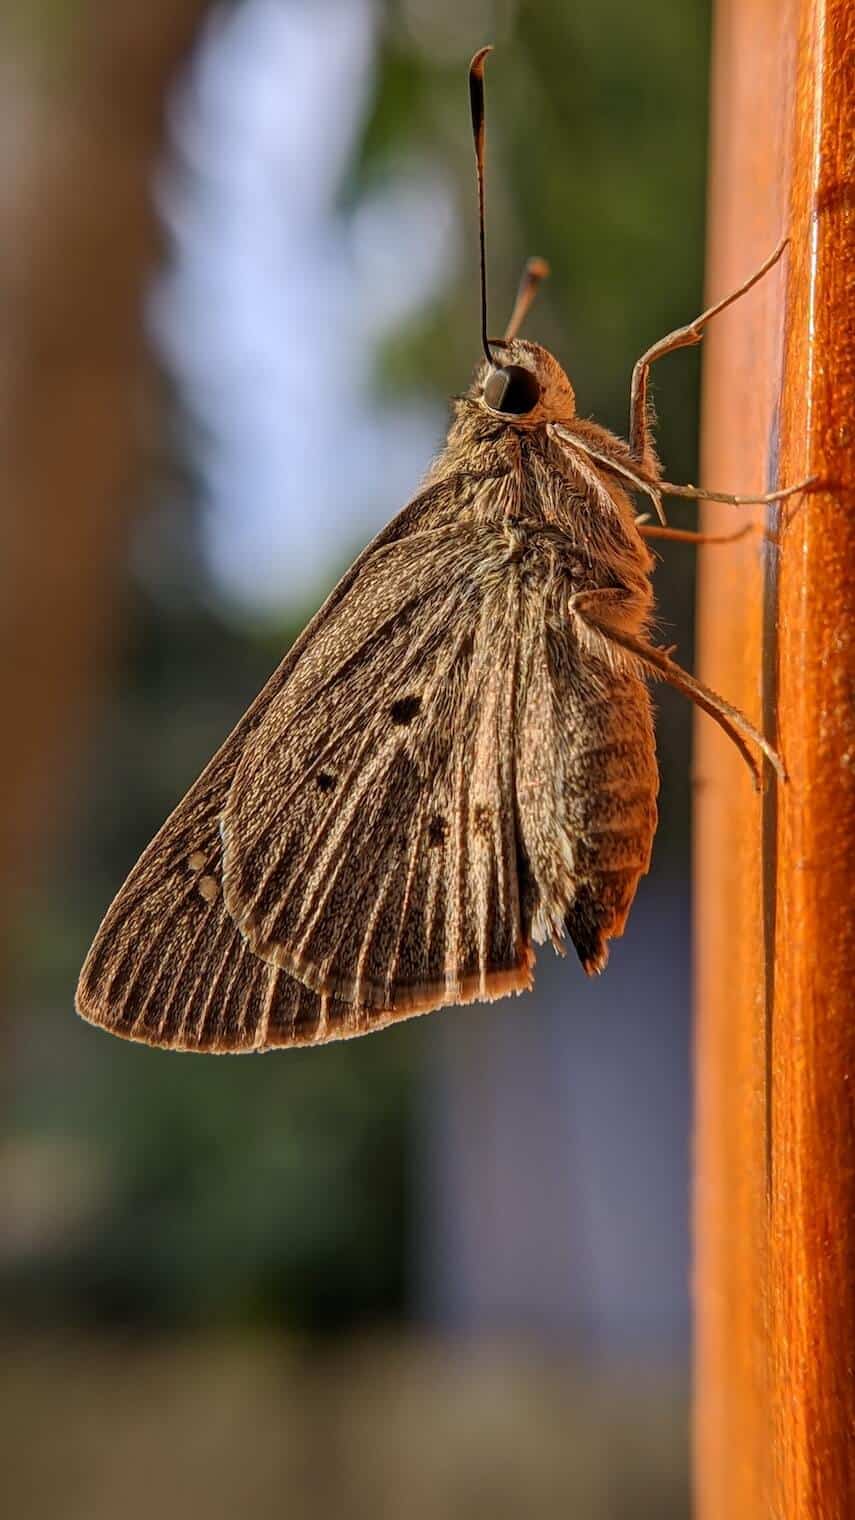 Brown moth standing on its legs vertically on a wooden wall.